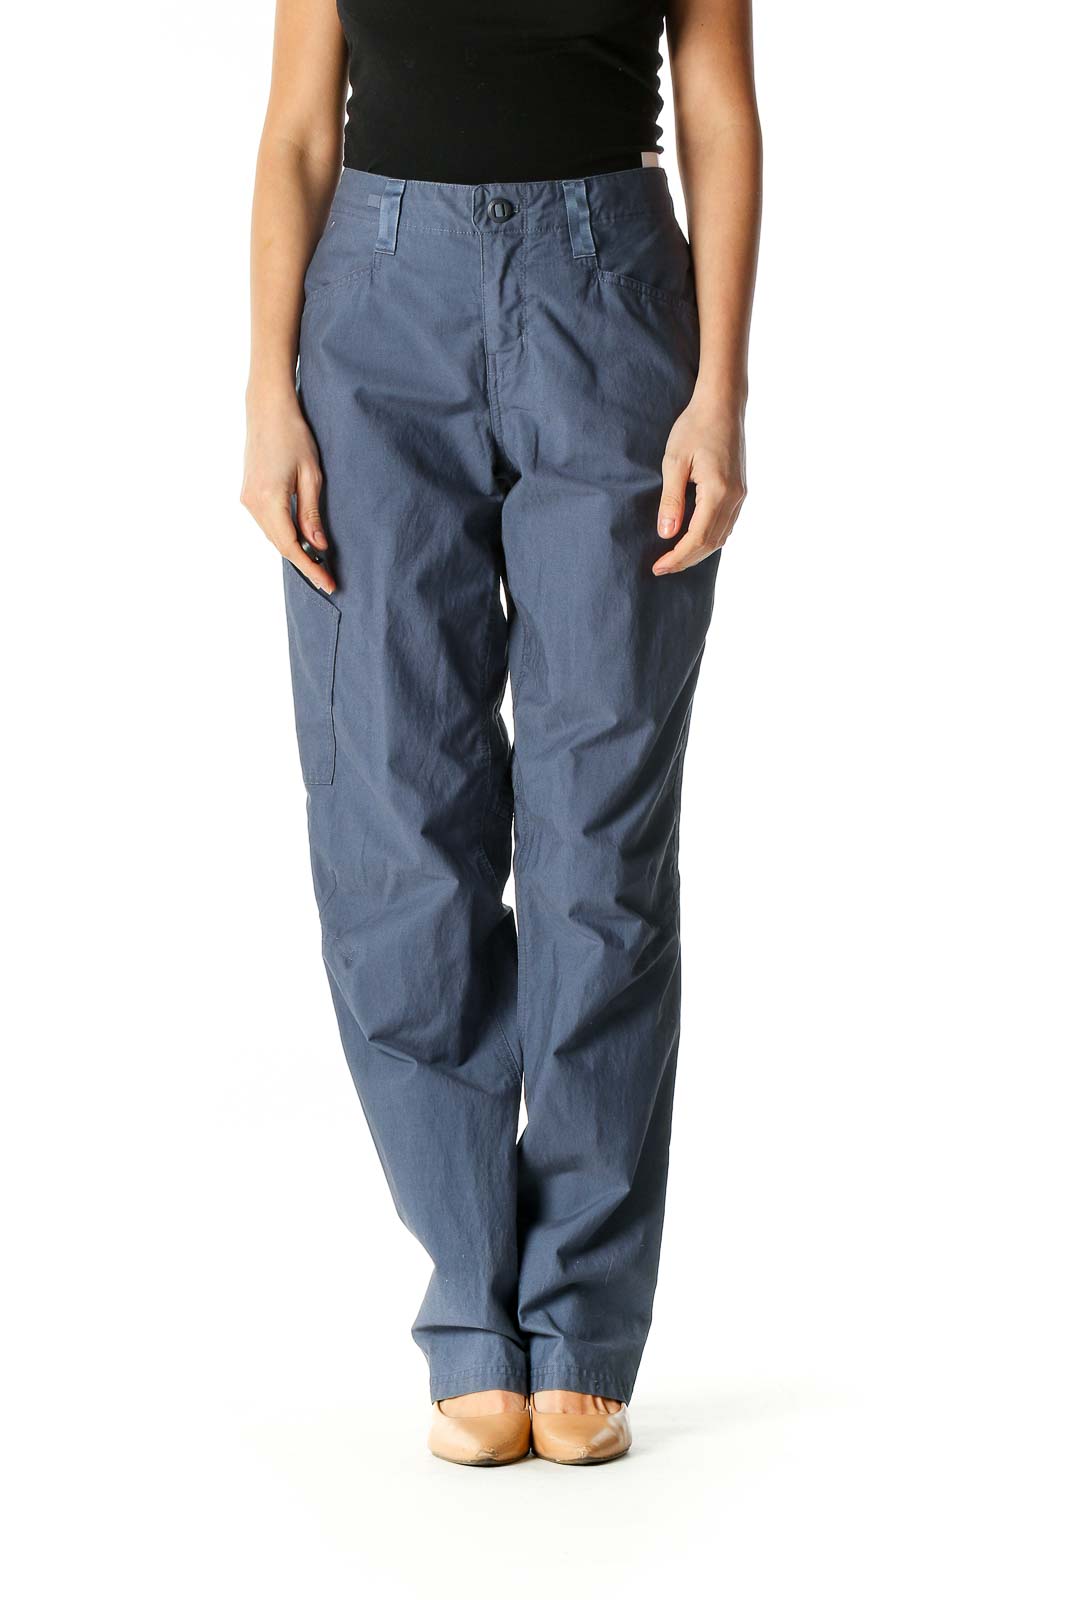 Gray Solid Activewear Pants Front